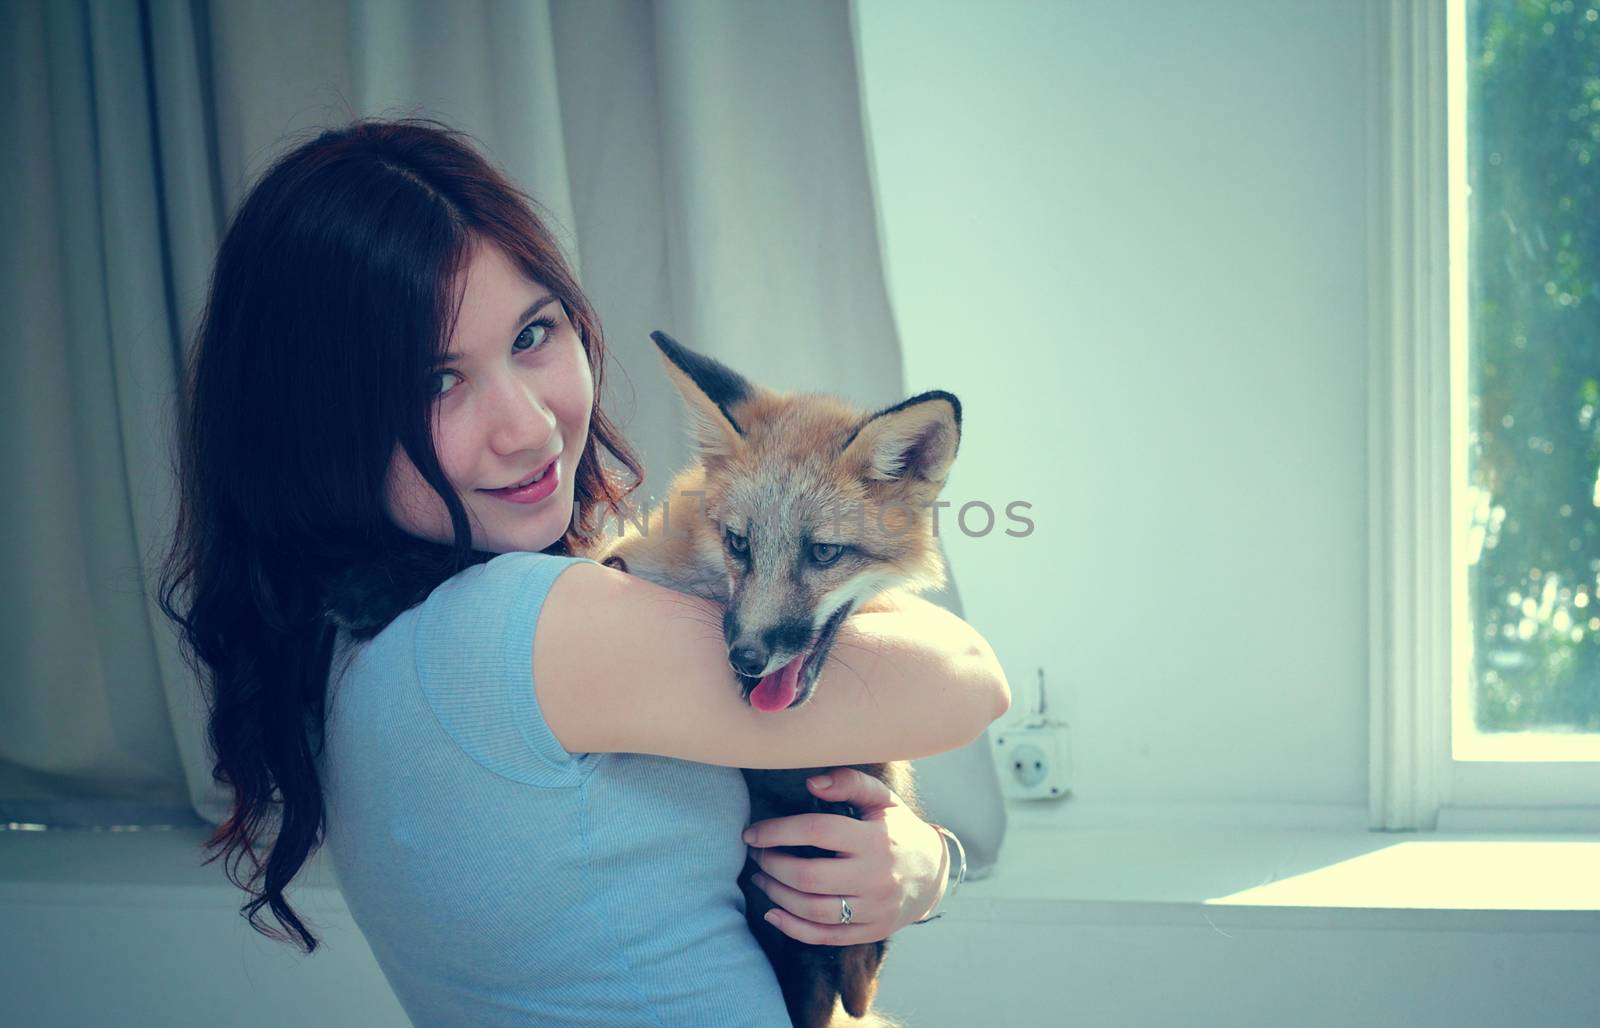 The girl is hugging the fox. by andsst